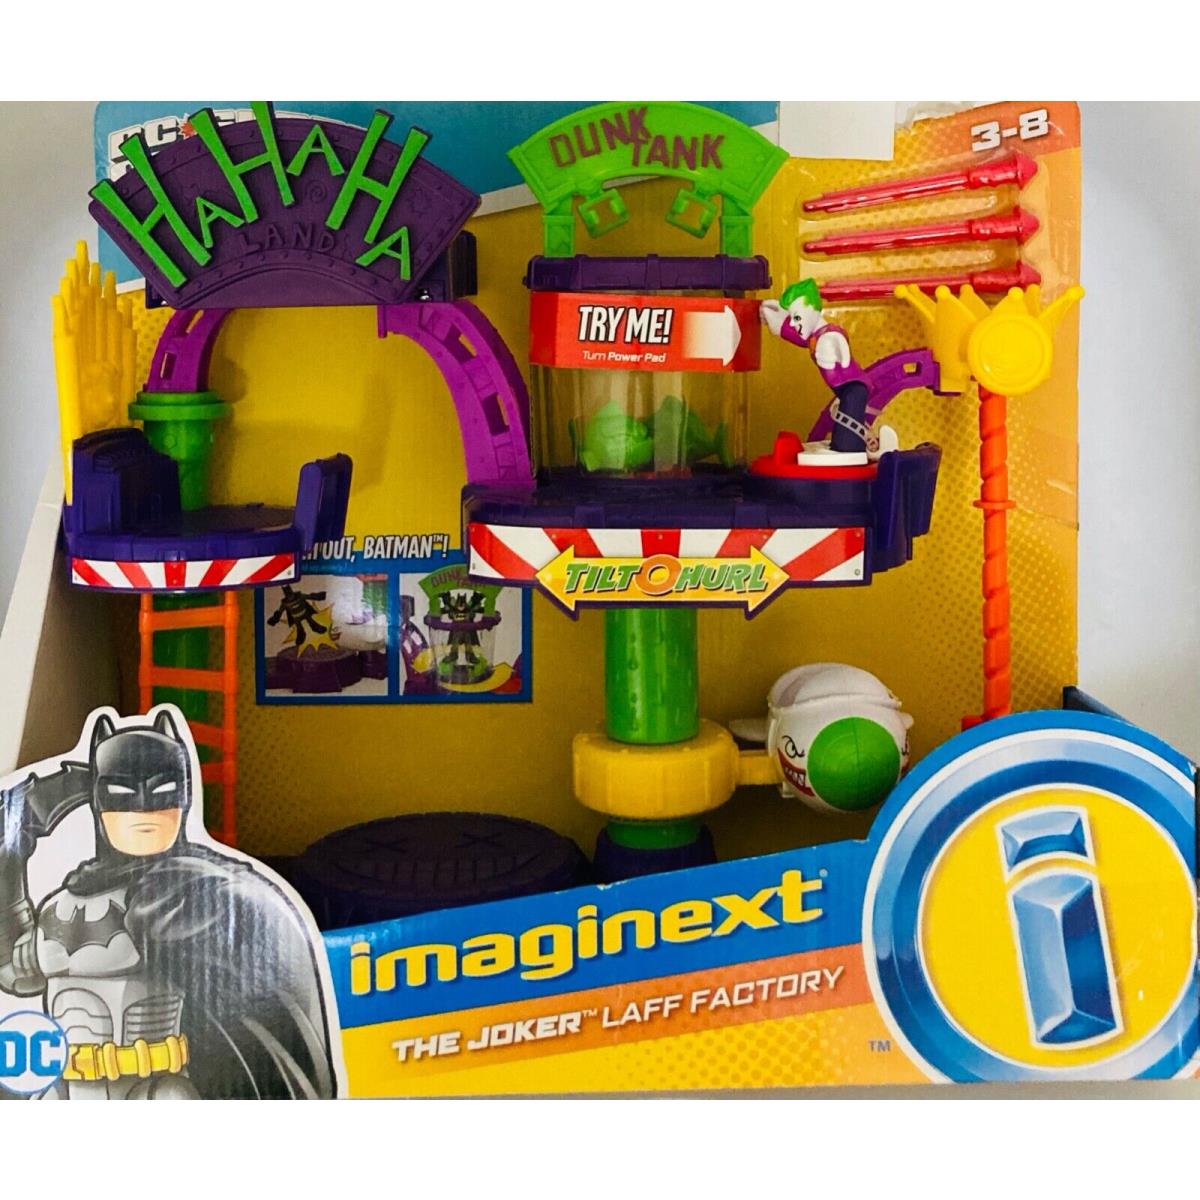 Fisher-price Imaginext DC Super Friends The Joker Laff Factory Toy Set